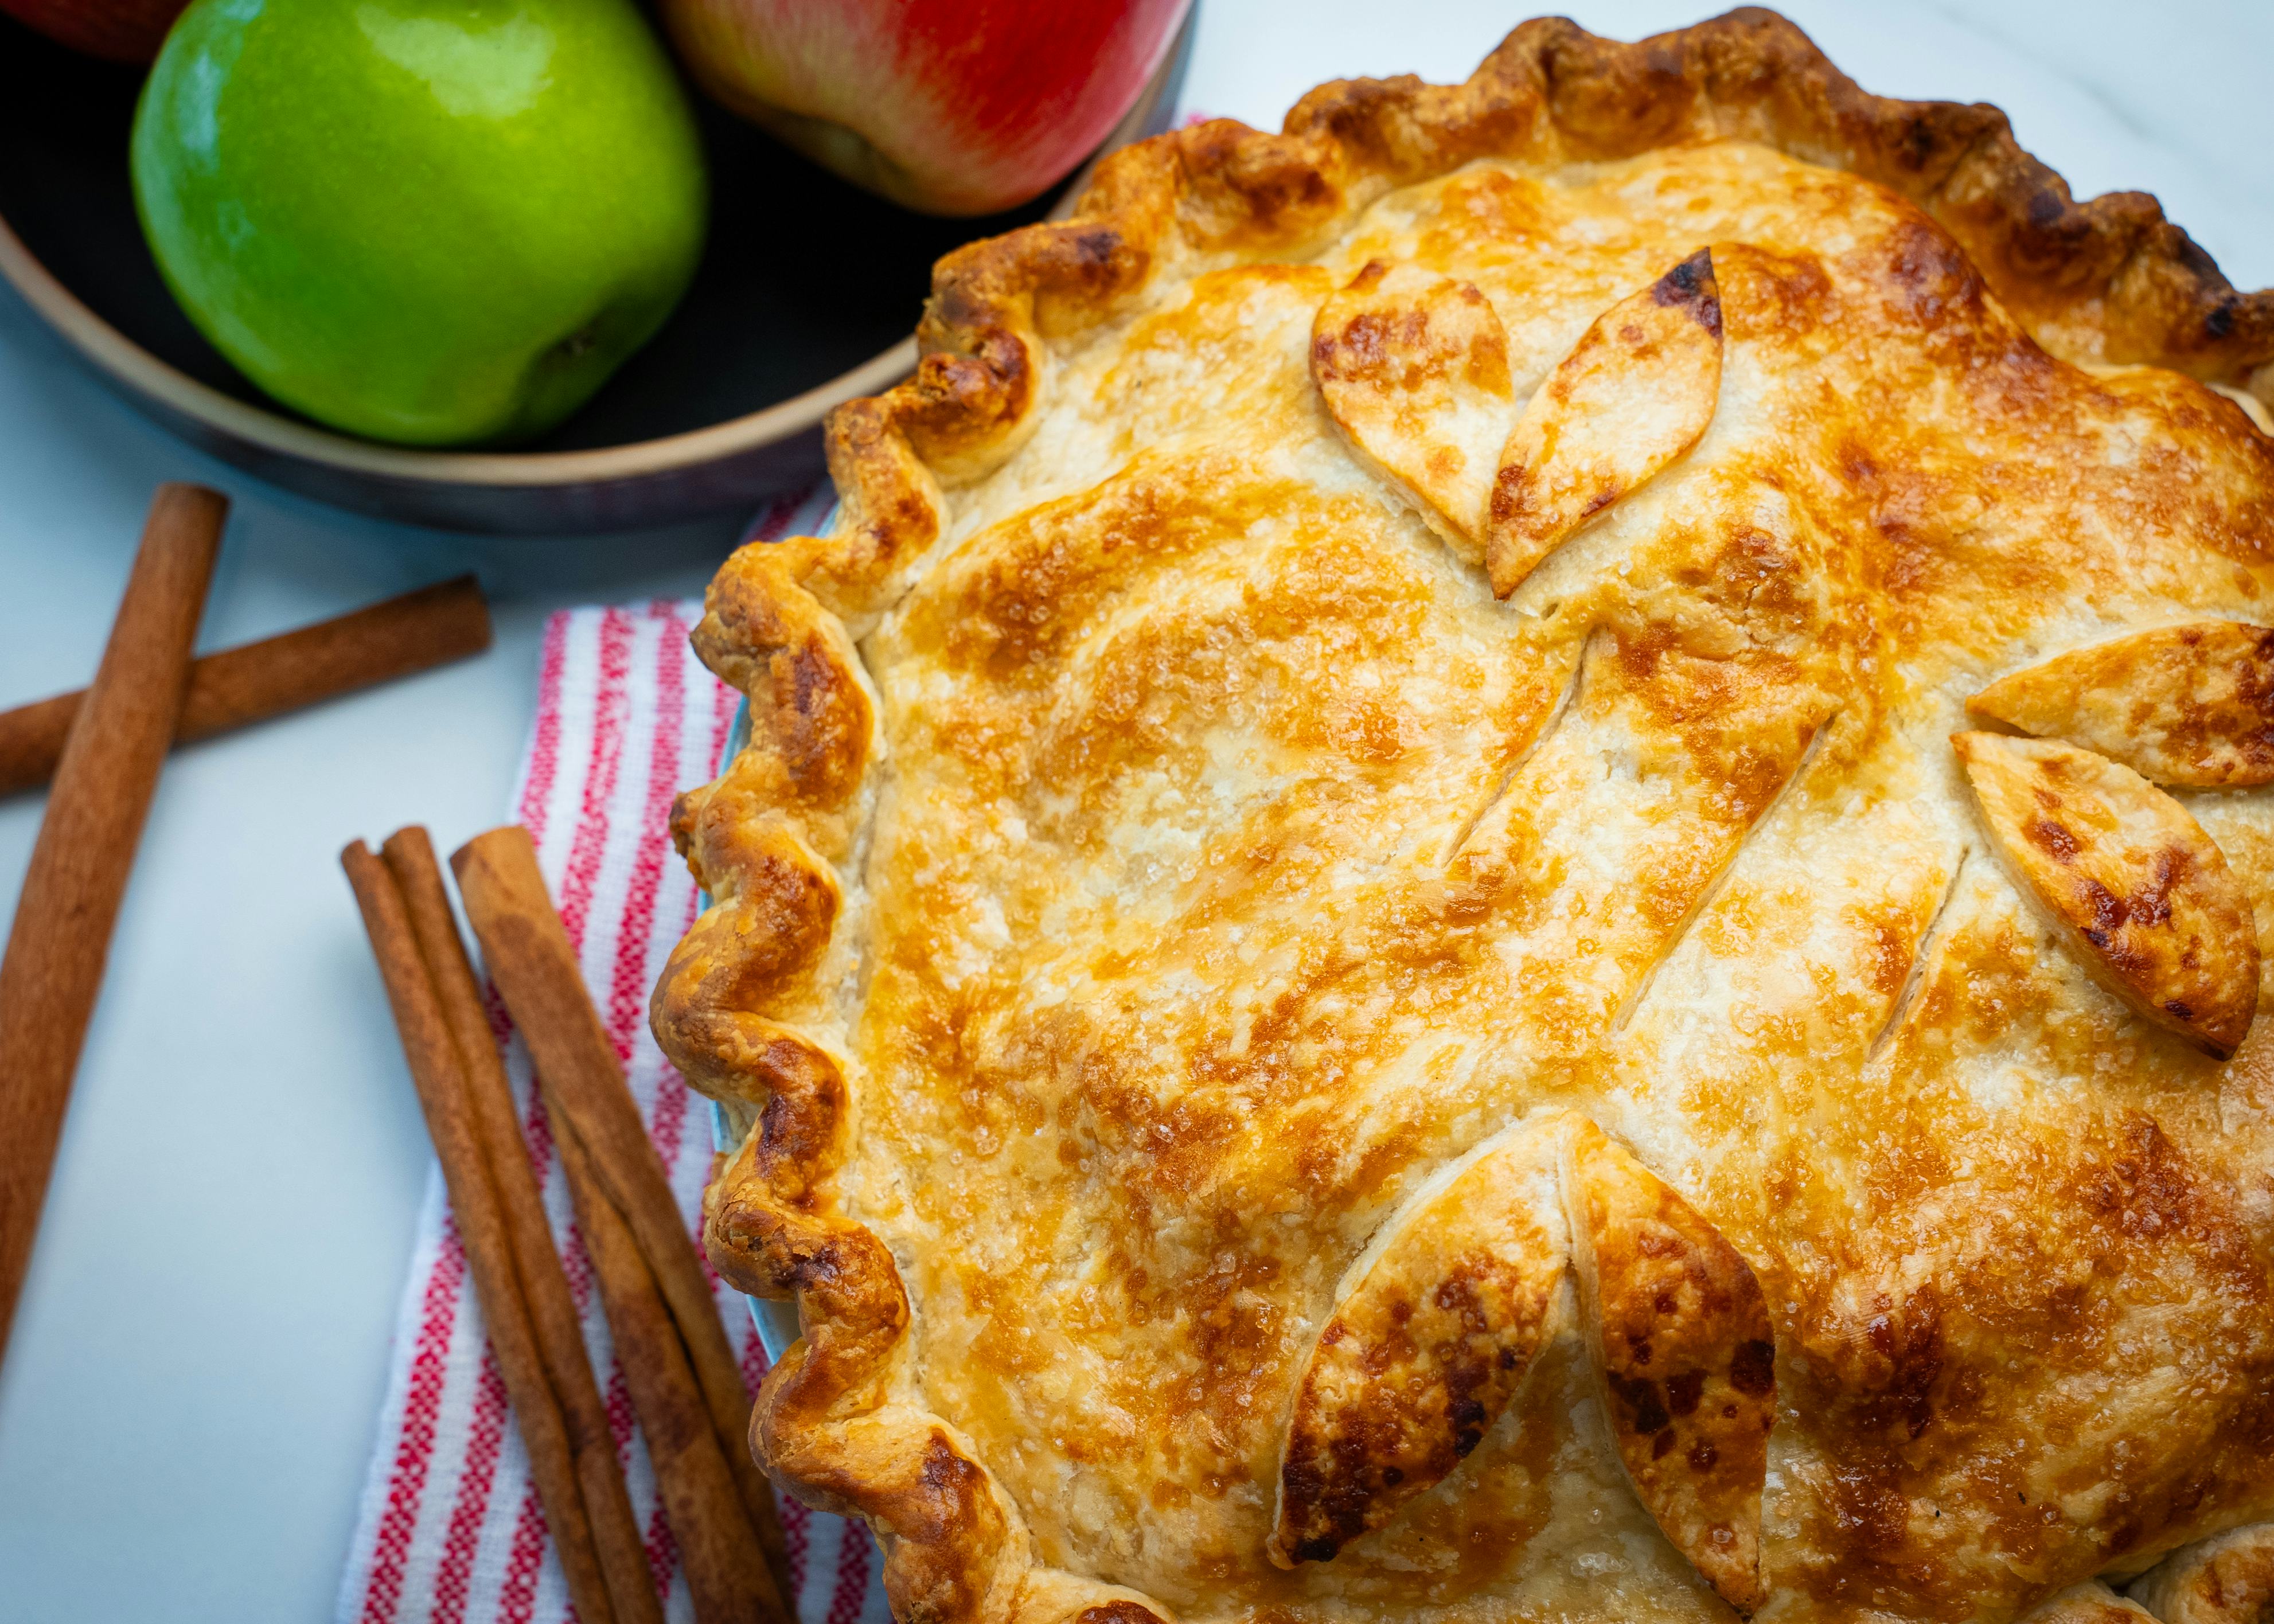 An apple pie with decorated pastry. Next to it are a few cinnamon sticks, and a bowl with two apples.